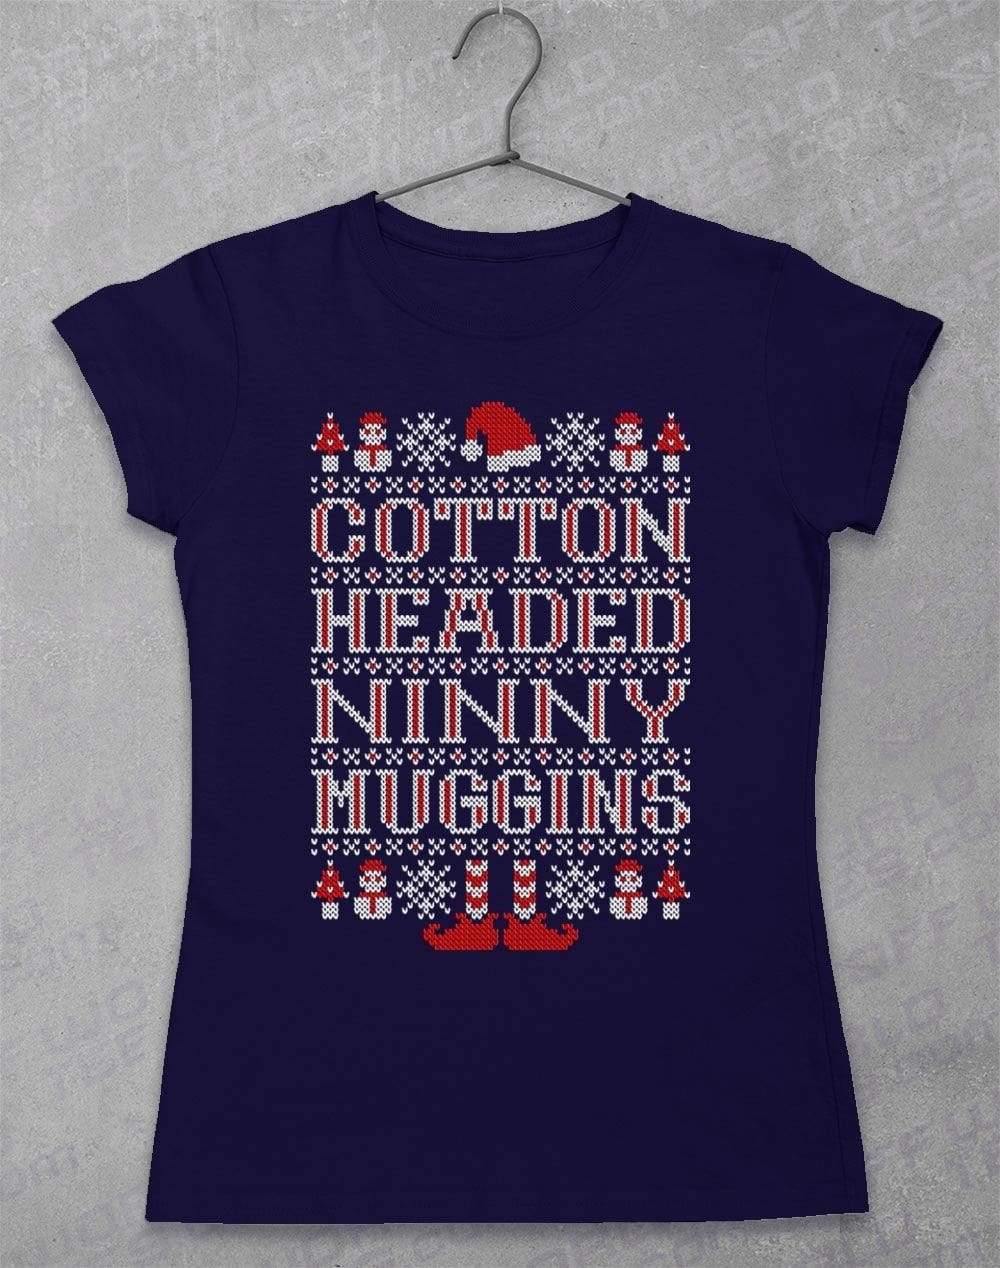 Cotton Headed Ninny Muggins Festive Knitted-Look Women's T-Shirt 8-10 / Navy  - Off World Tees